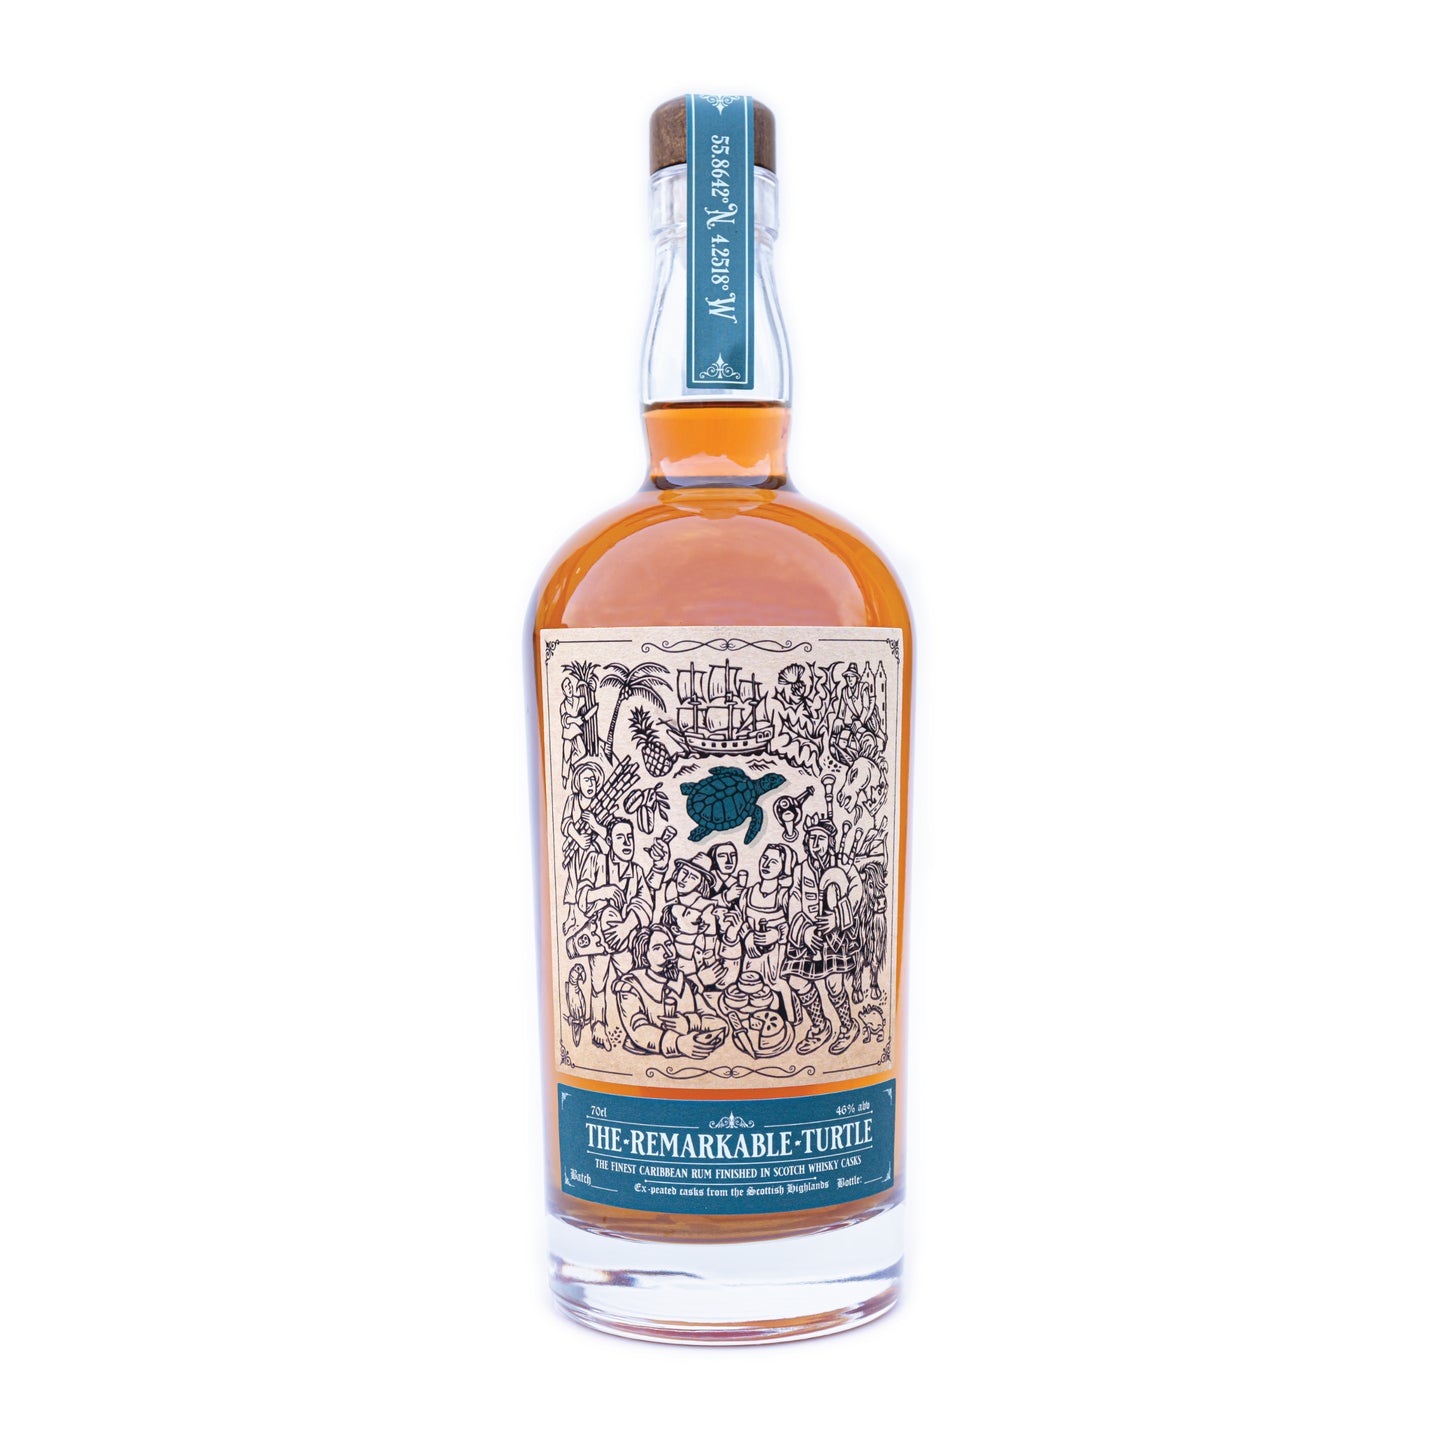 The Remarkable Turtle Rum - Ex Scotch Peated Casks Rum 2nd Release (70cl, 46%)